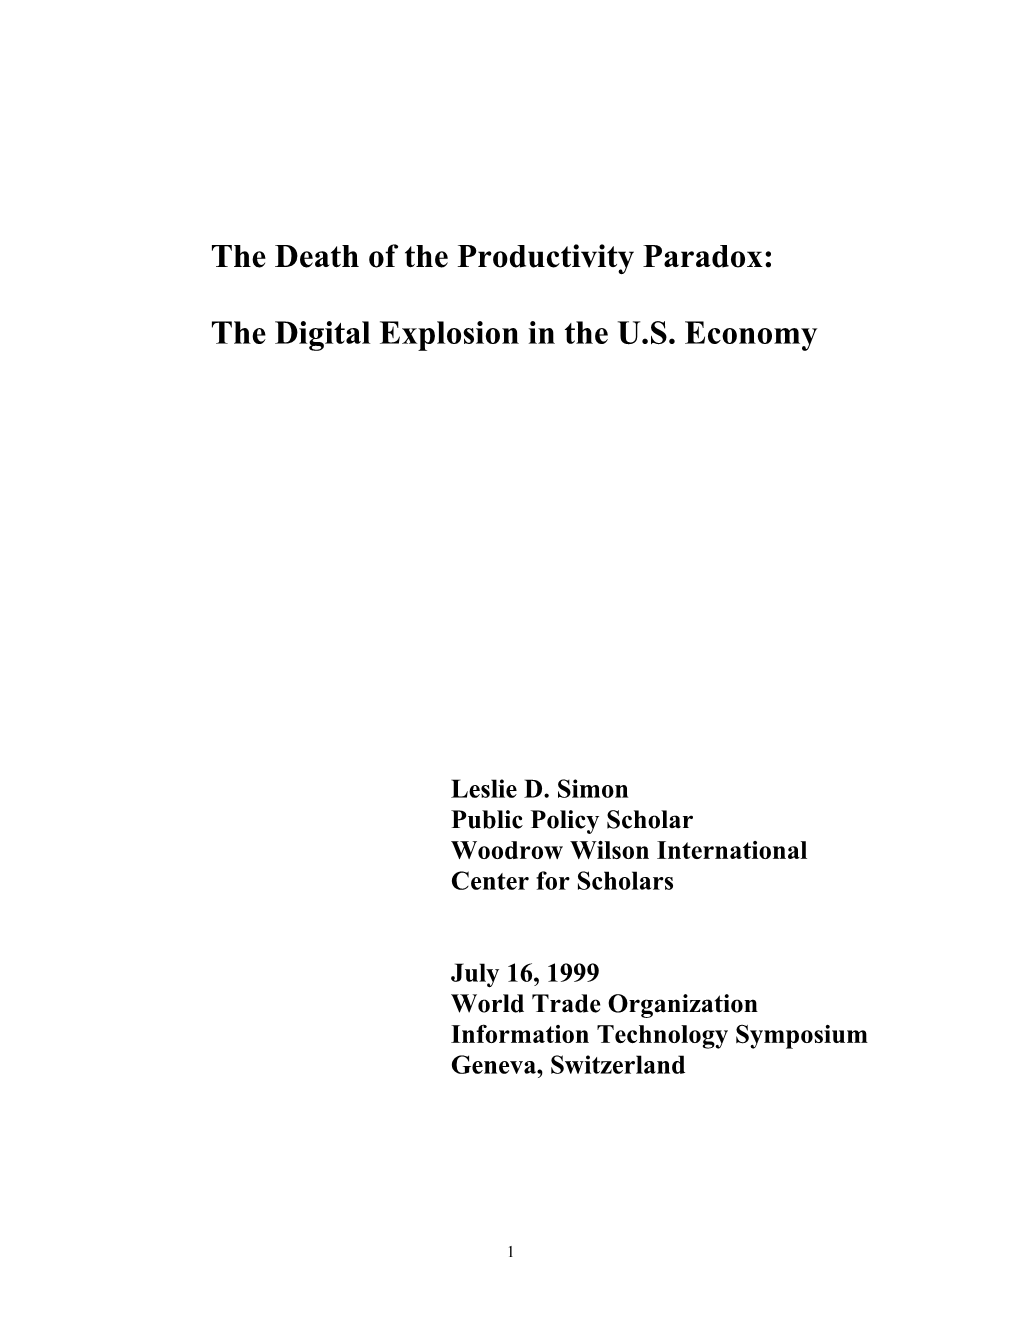 The Death of the Productivity Paradox